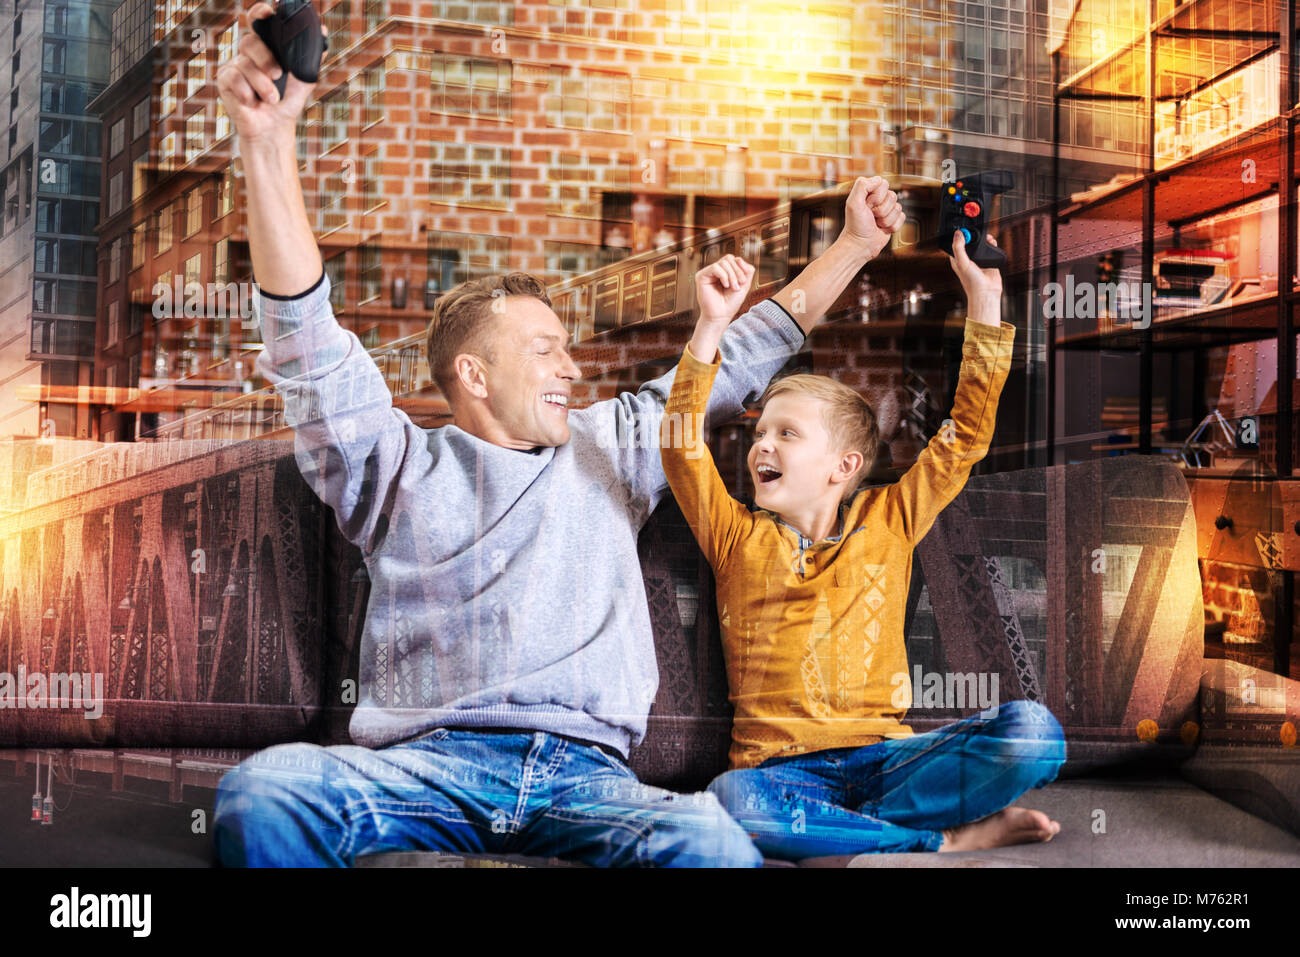 Excited relatives celebrating their victory in a video game Stock Photo